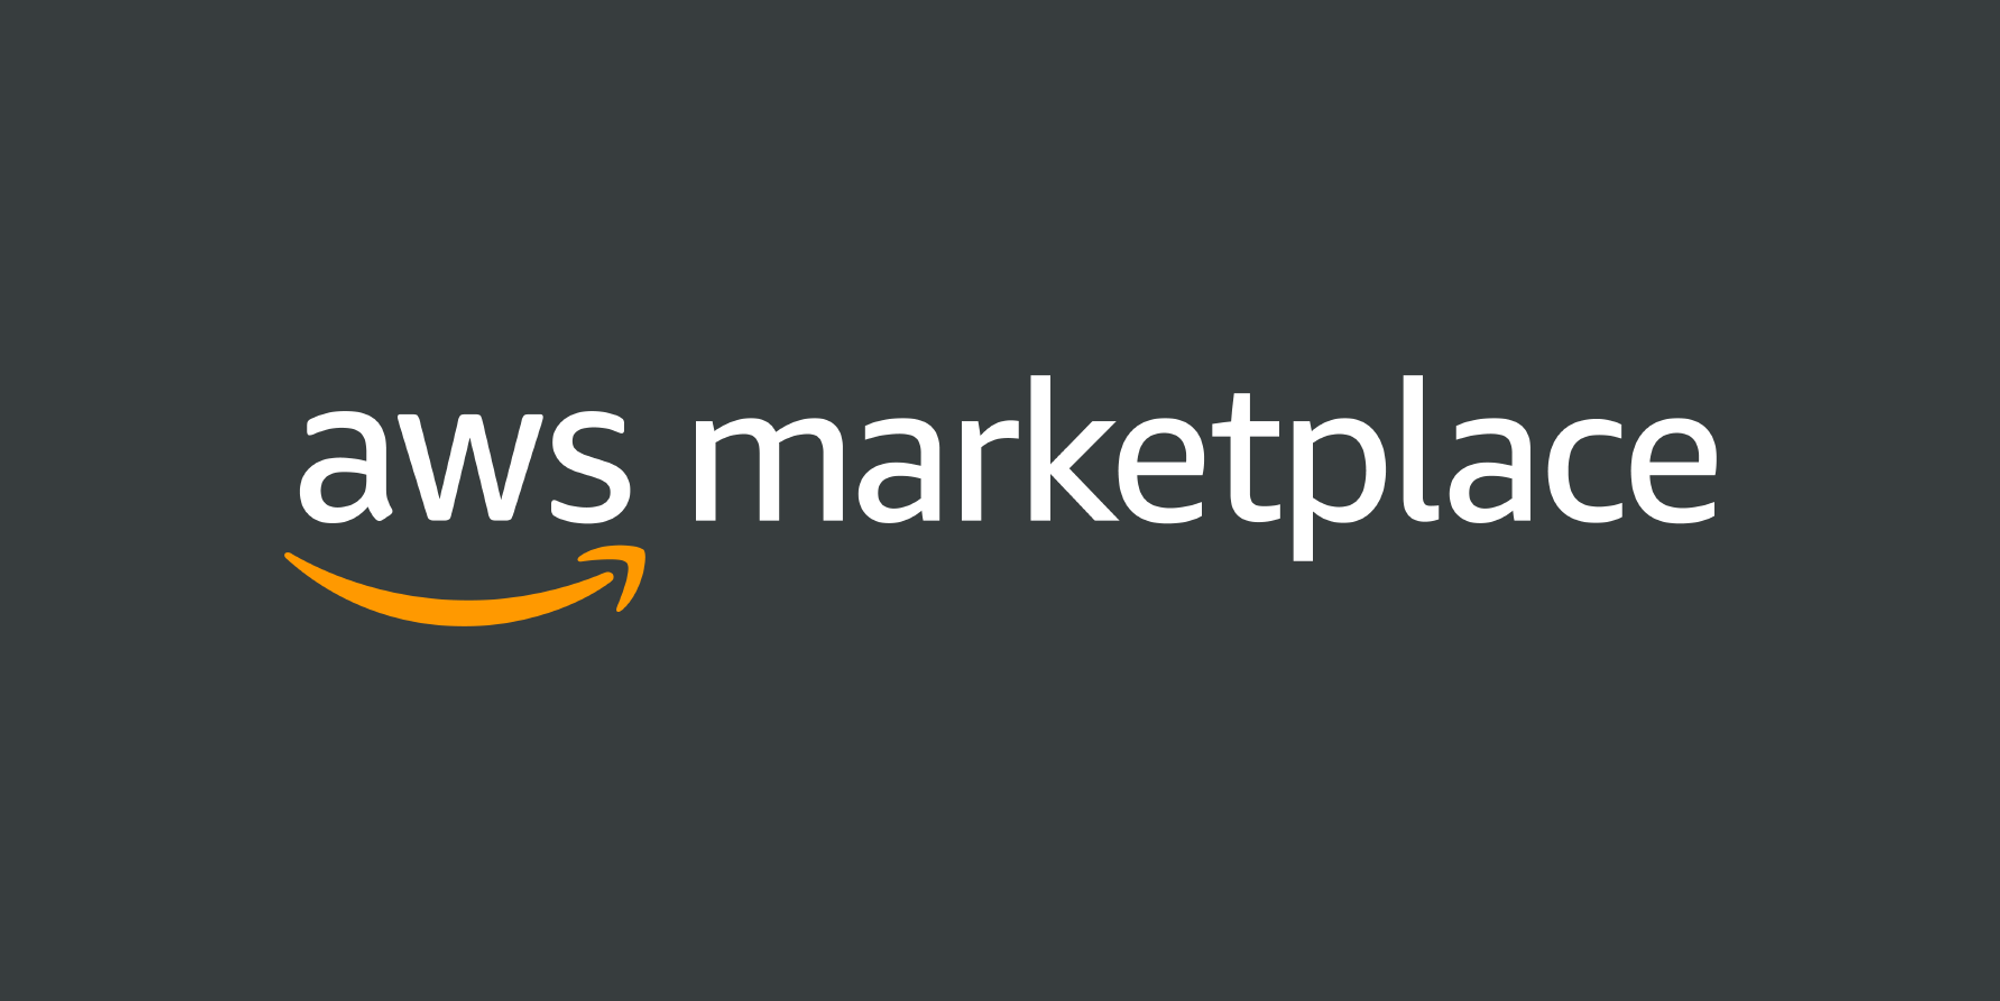 AWS Marketplace: Datrics - a no-code tool to implement AI and analytics automation